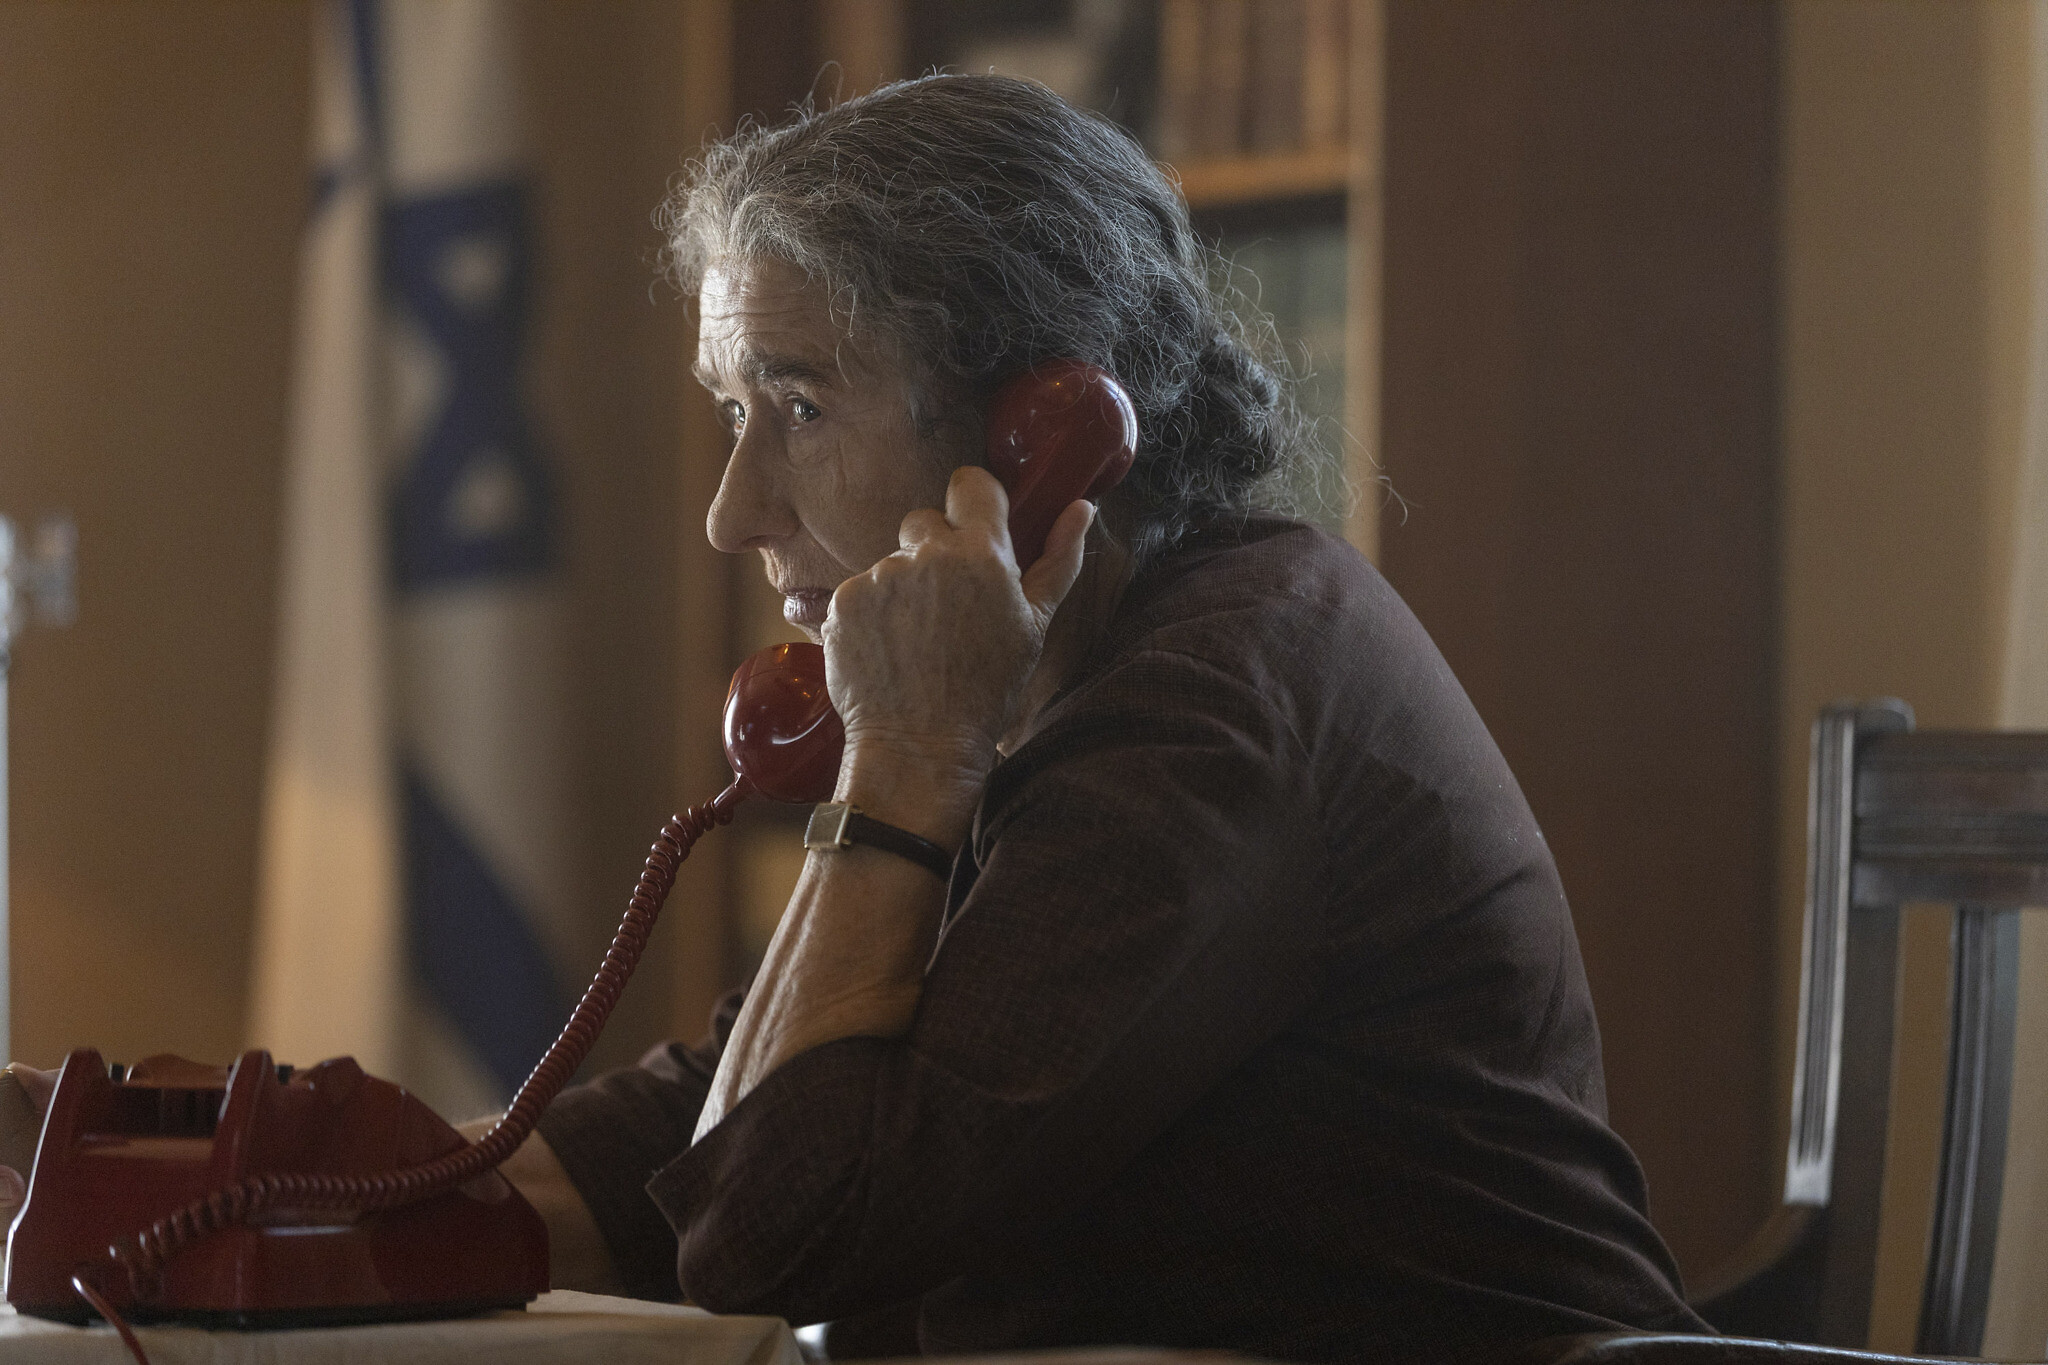 Director of 'Golda': Criticism against Israel's first female PM